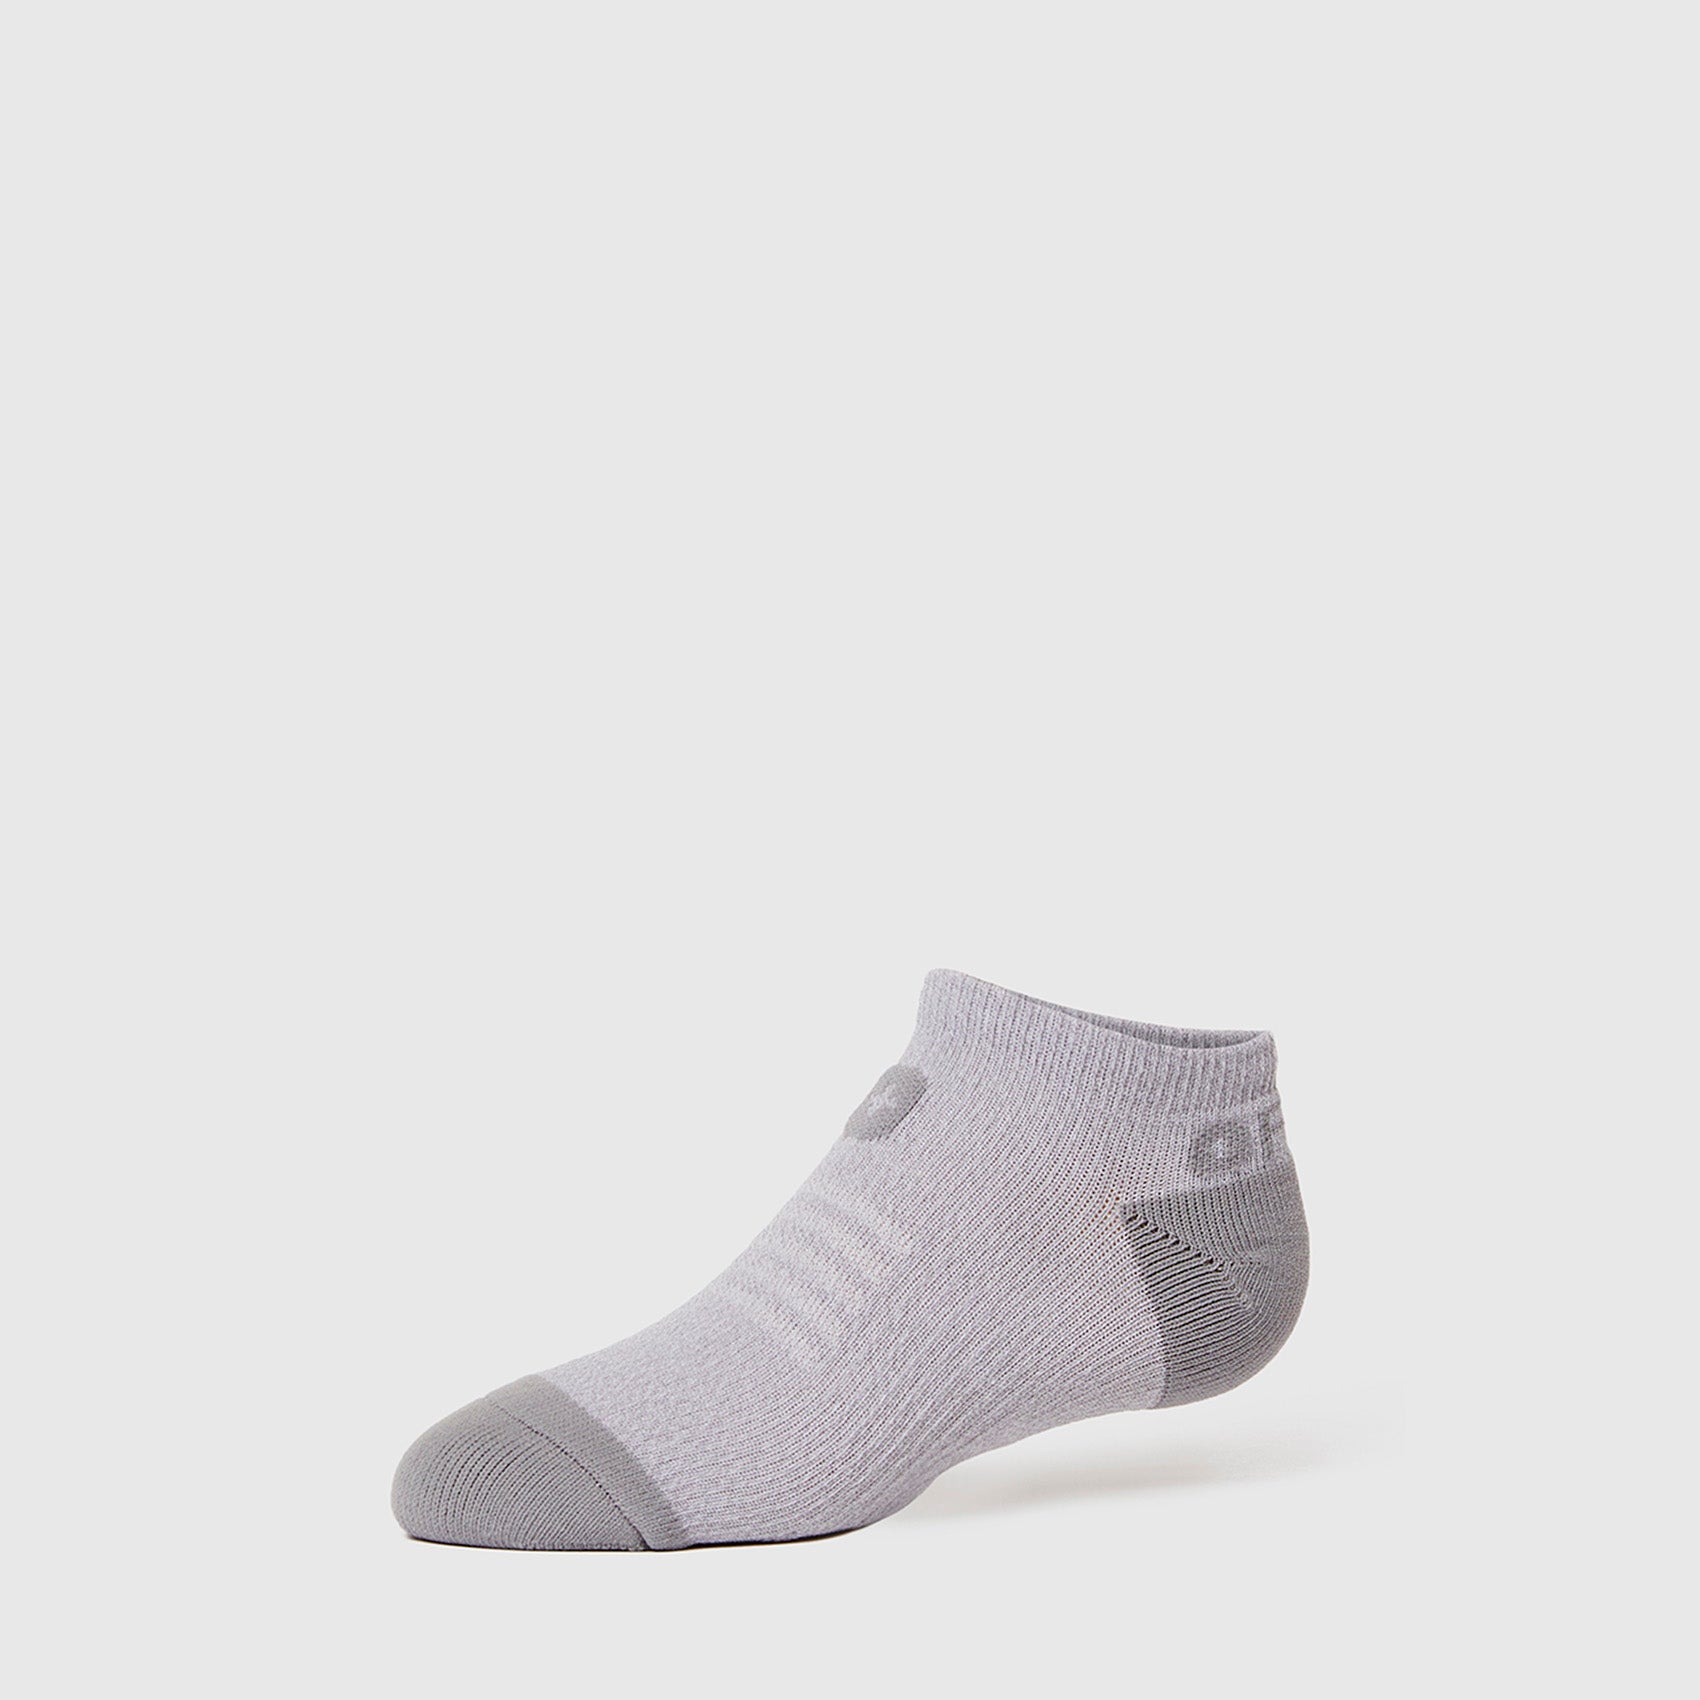 Calcetines unisex Ankle blanco